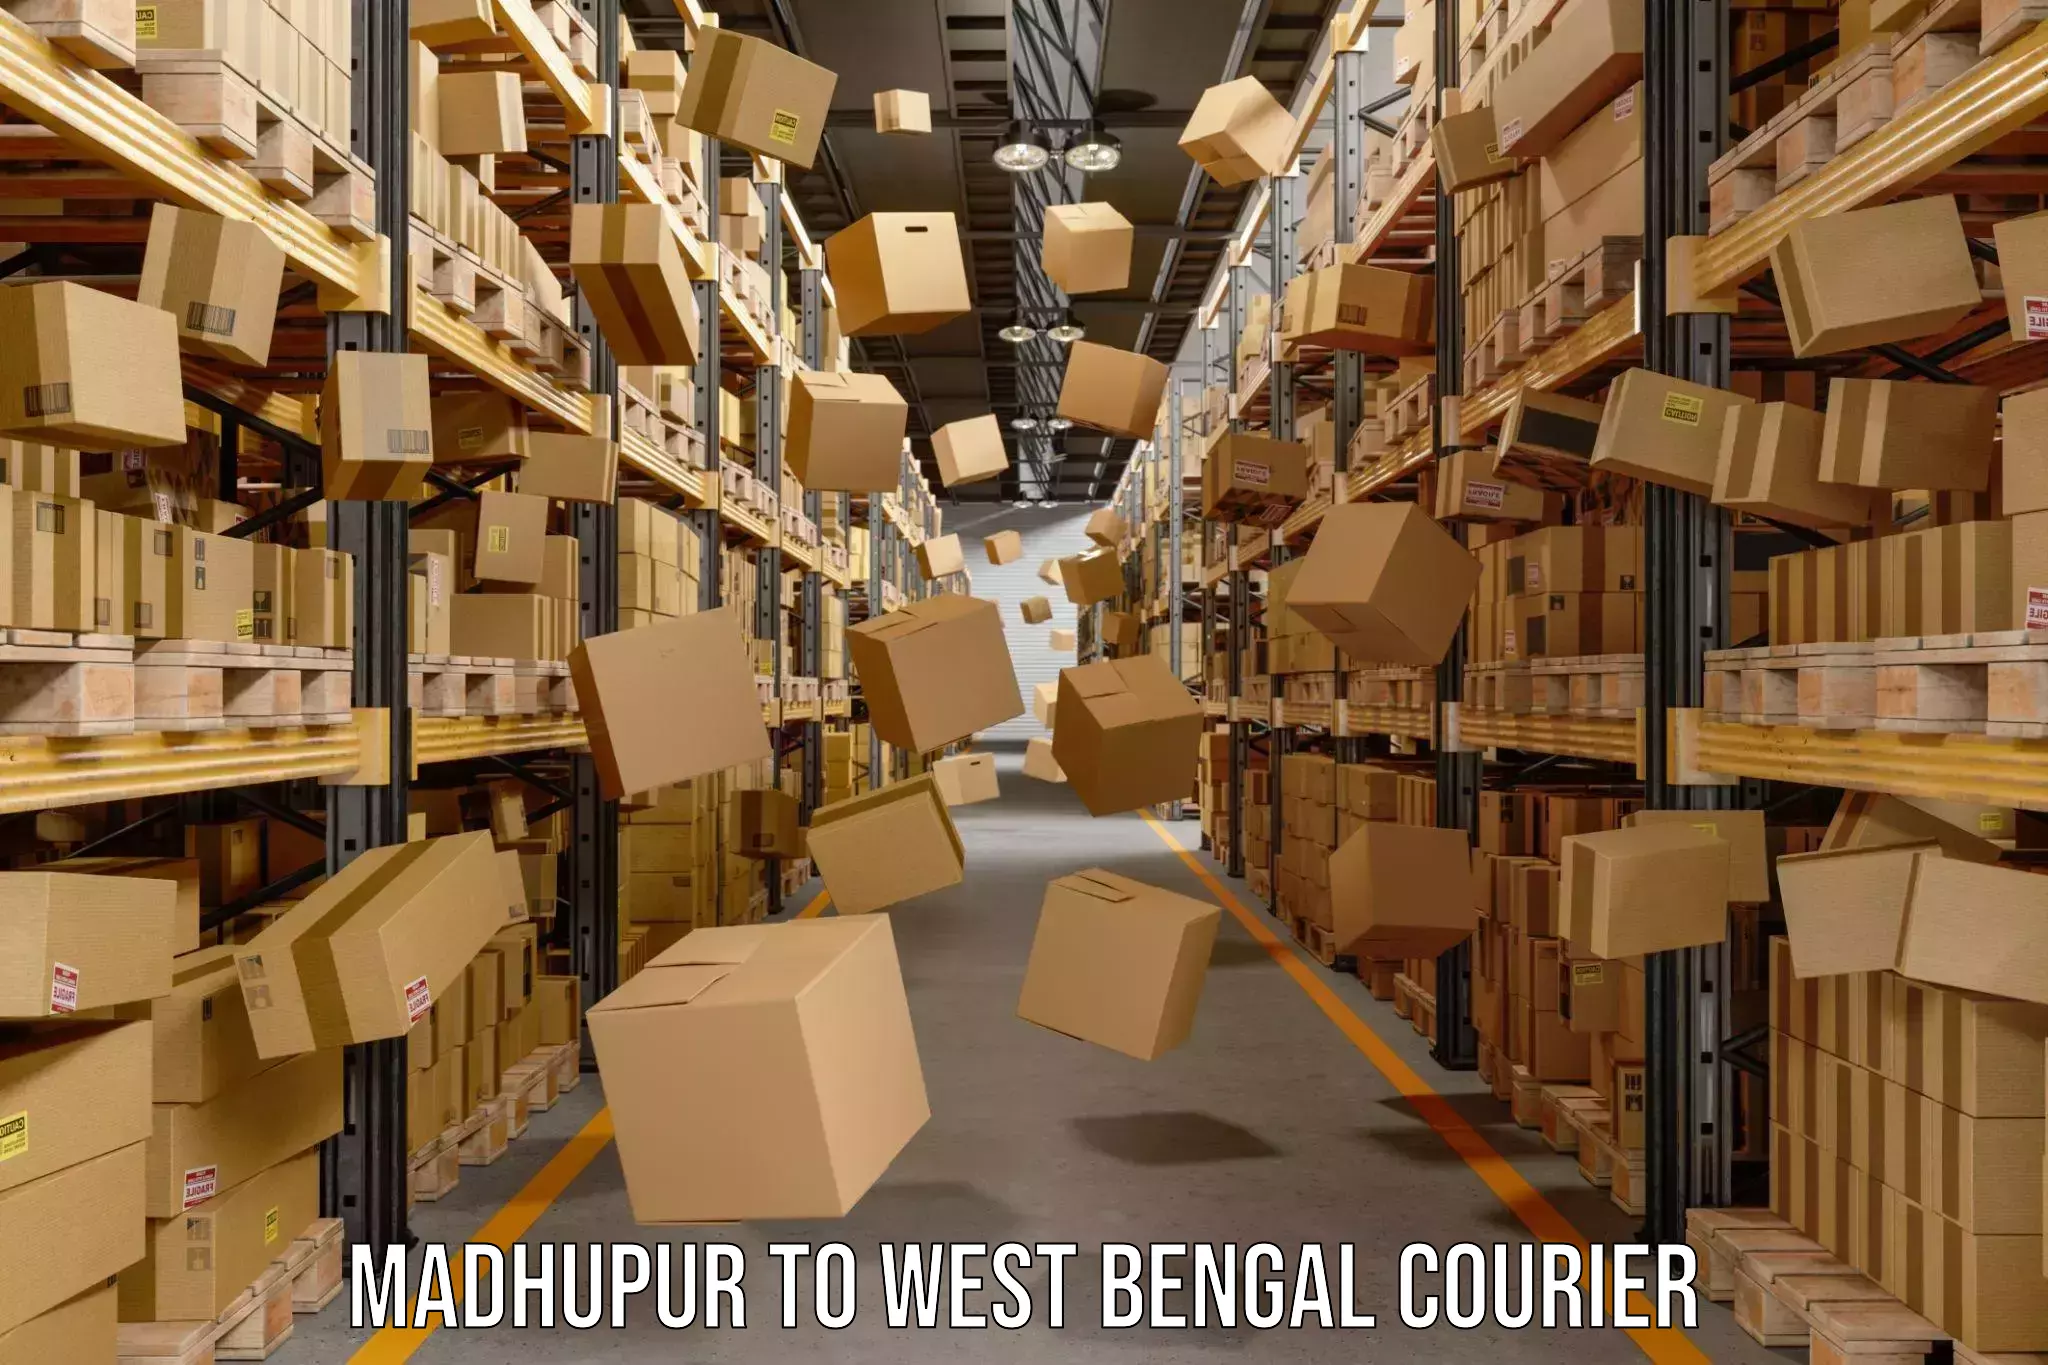 Courier service comparison in Madhupur to Mohammad Bazar